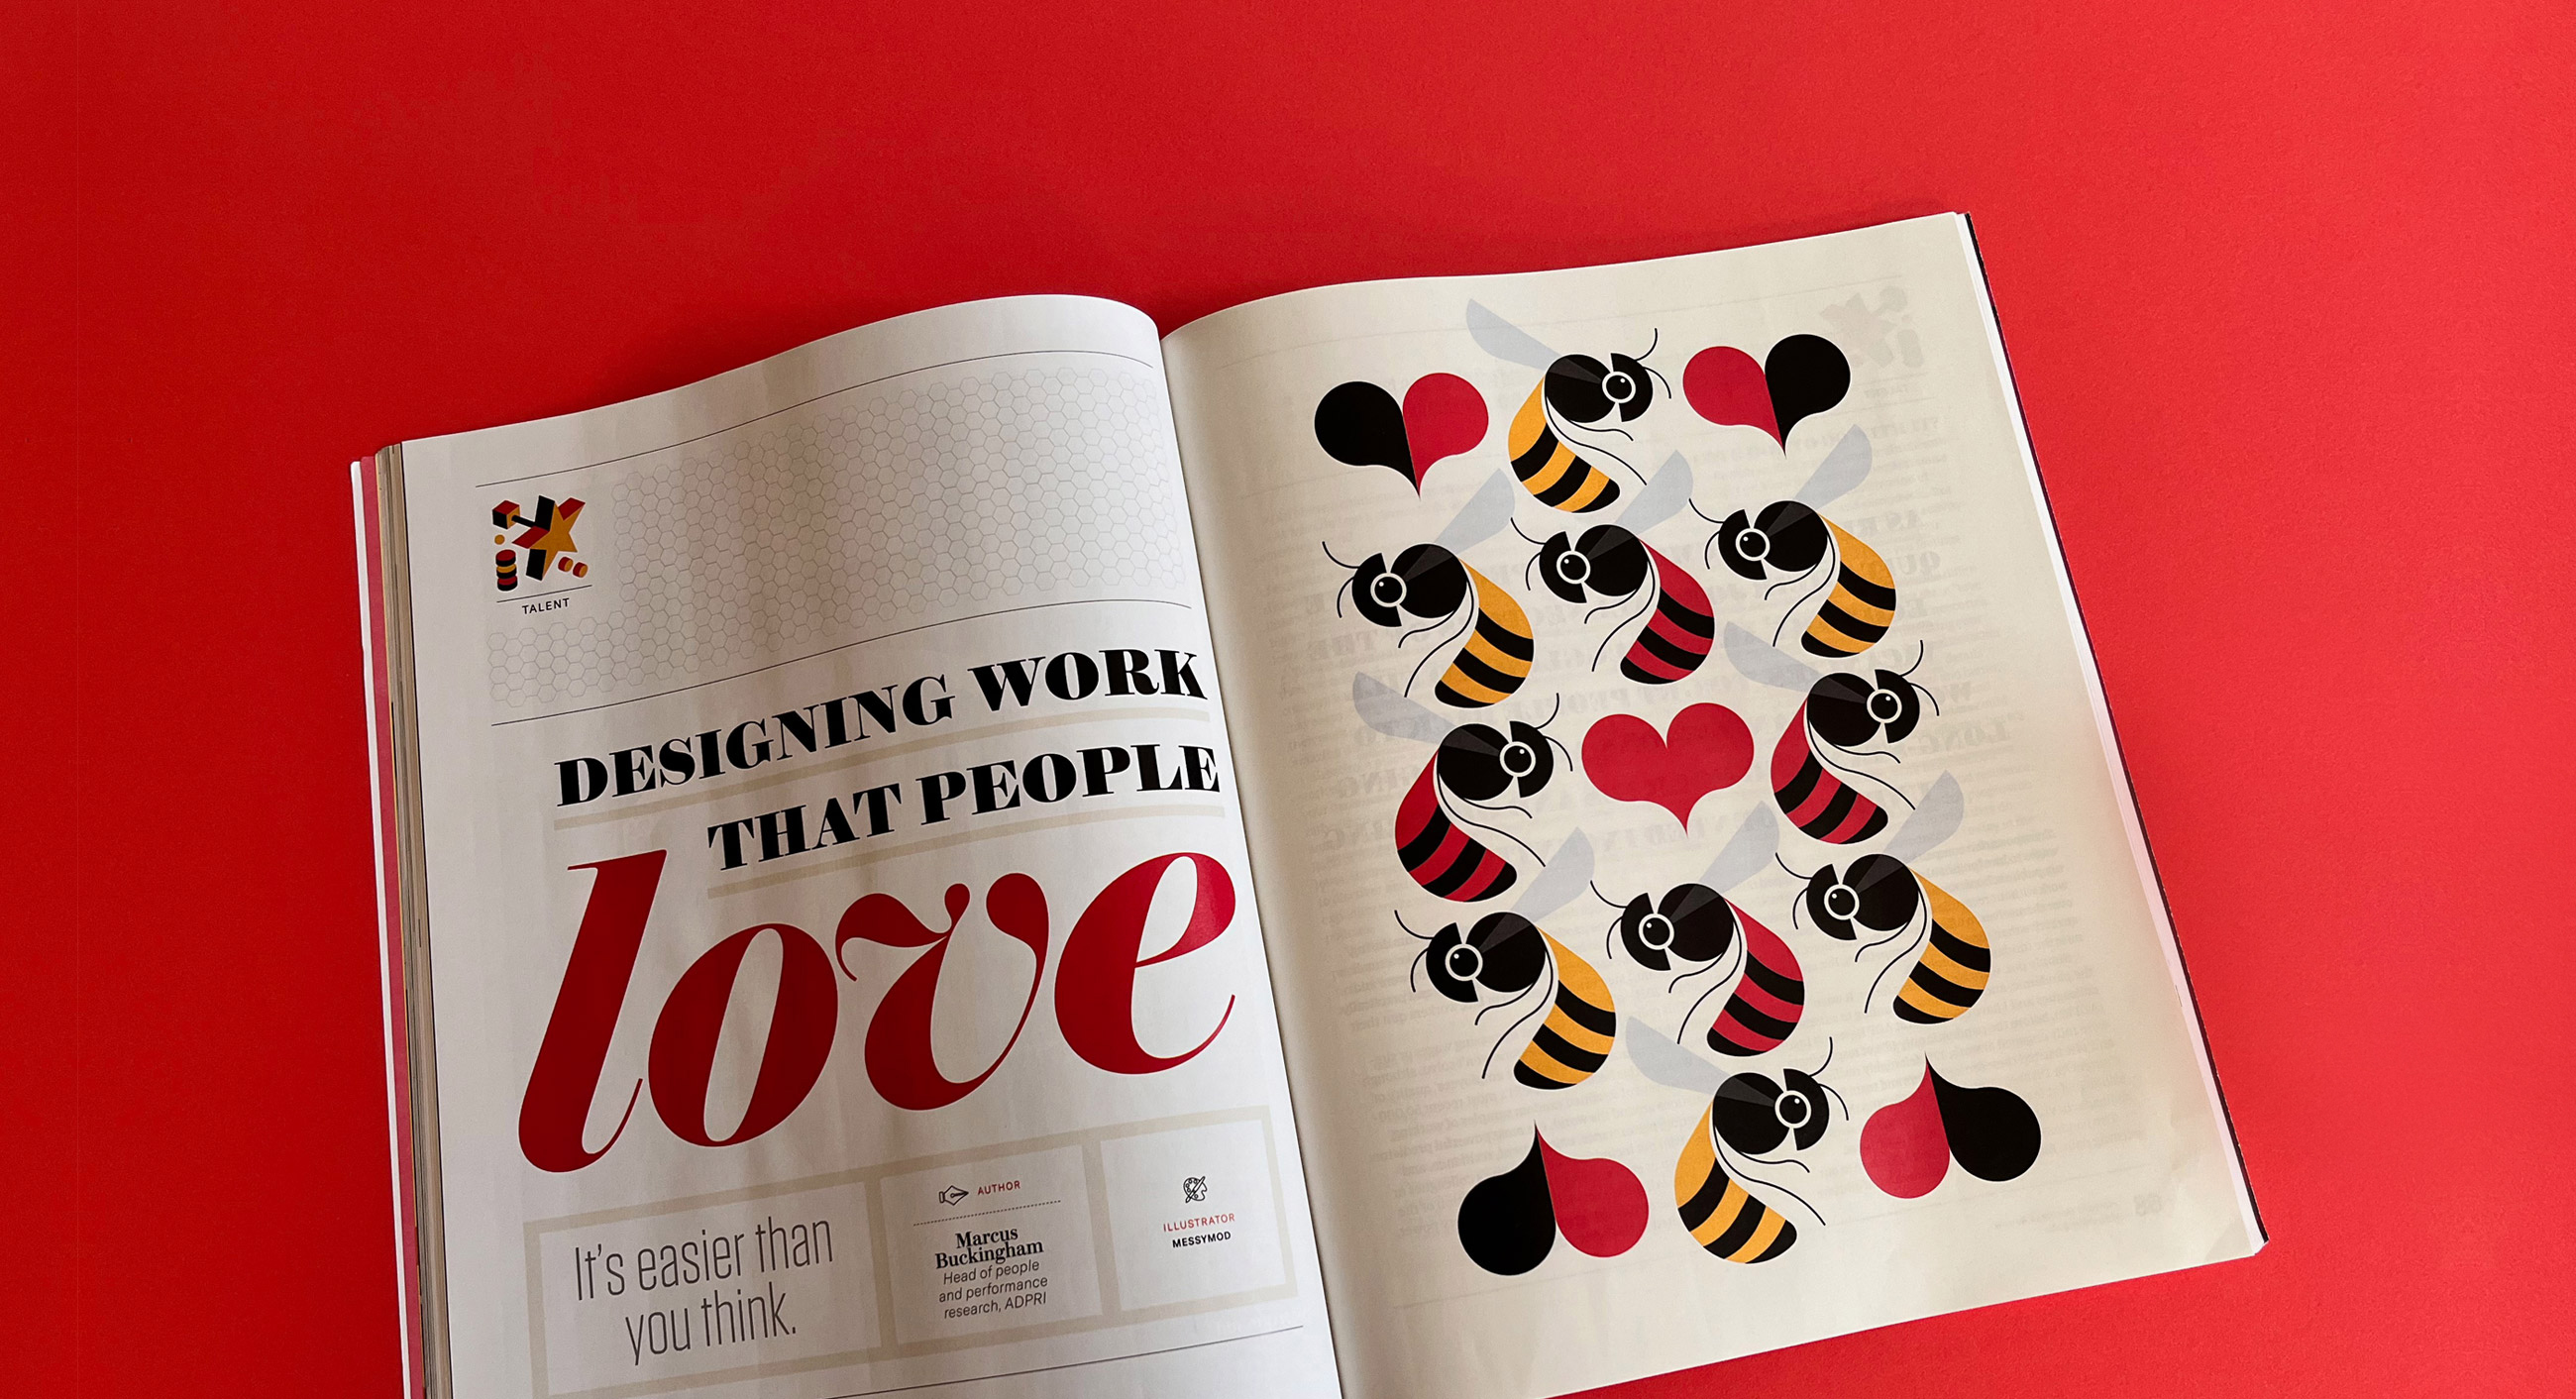 open spread of harvard business review wit bees illustration